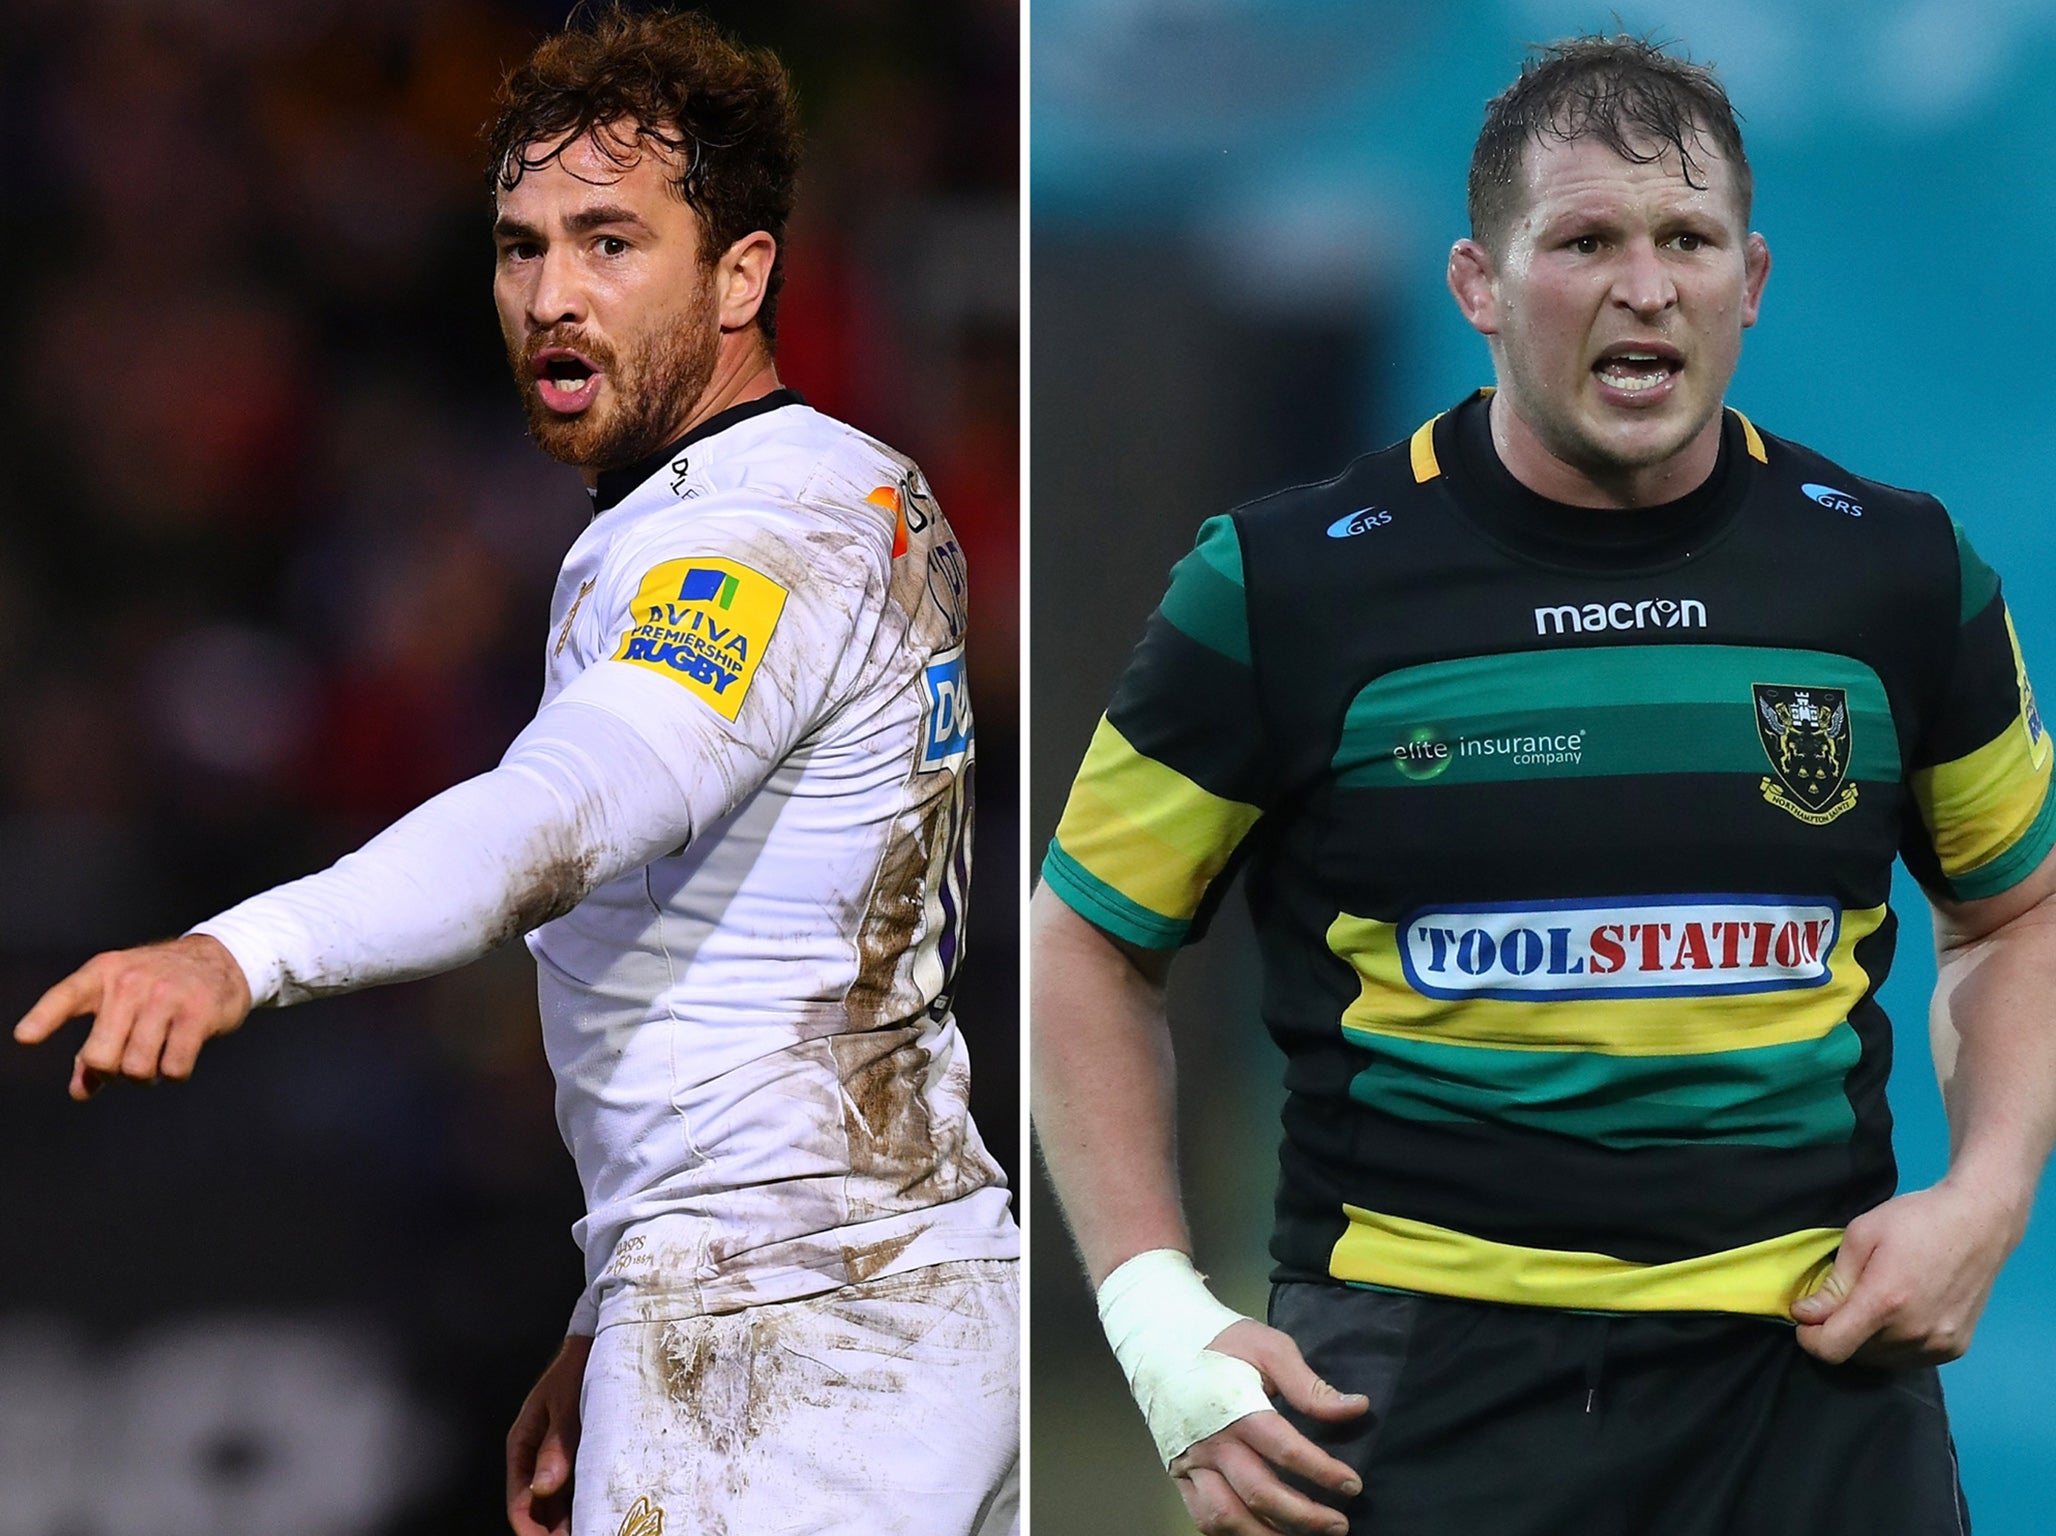 Danny Cipriani and Dylan Hartley are experiencing contrasting fortunes for club and country